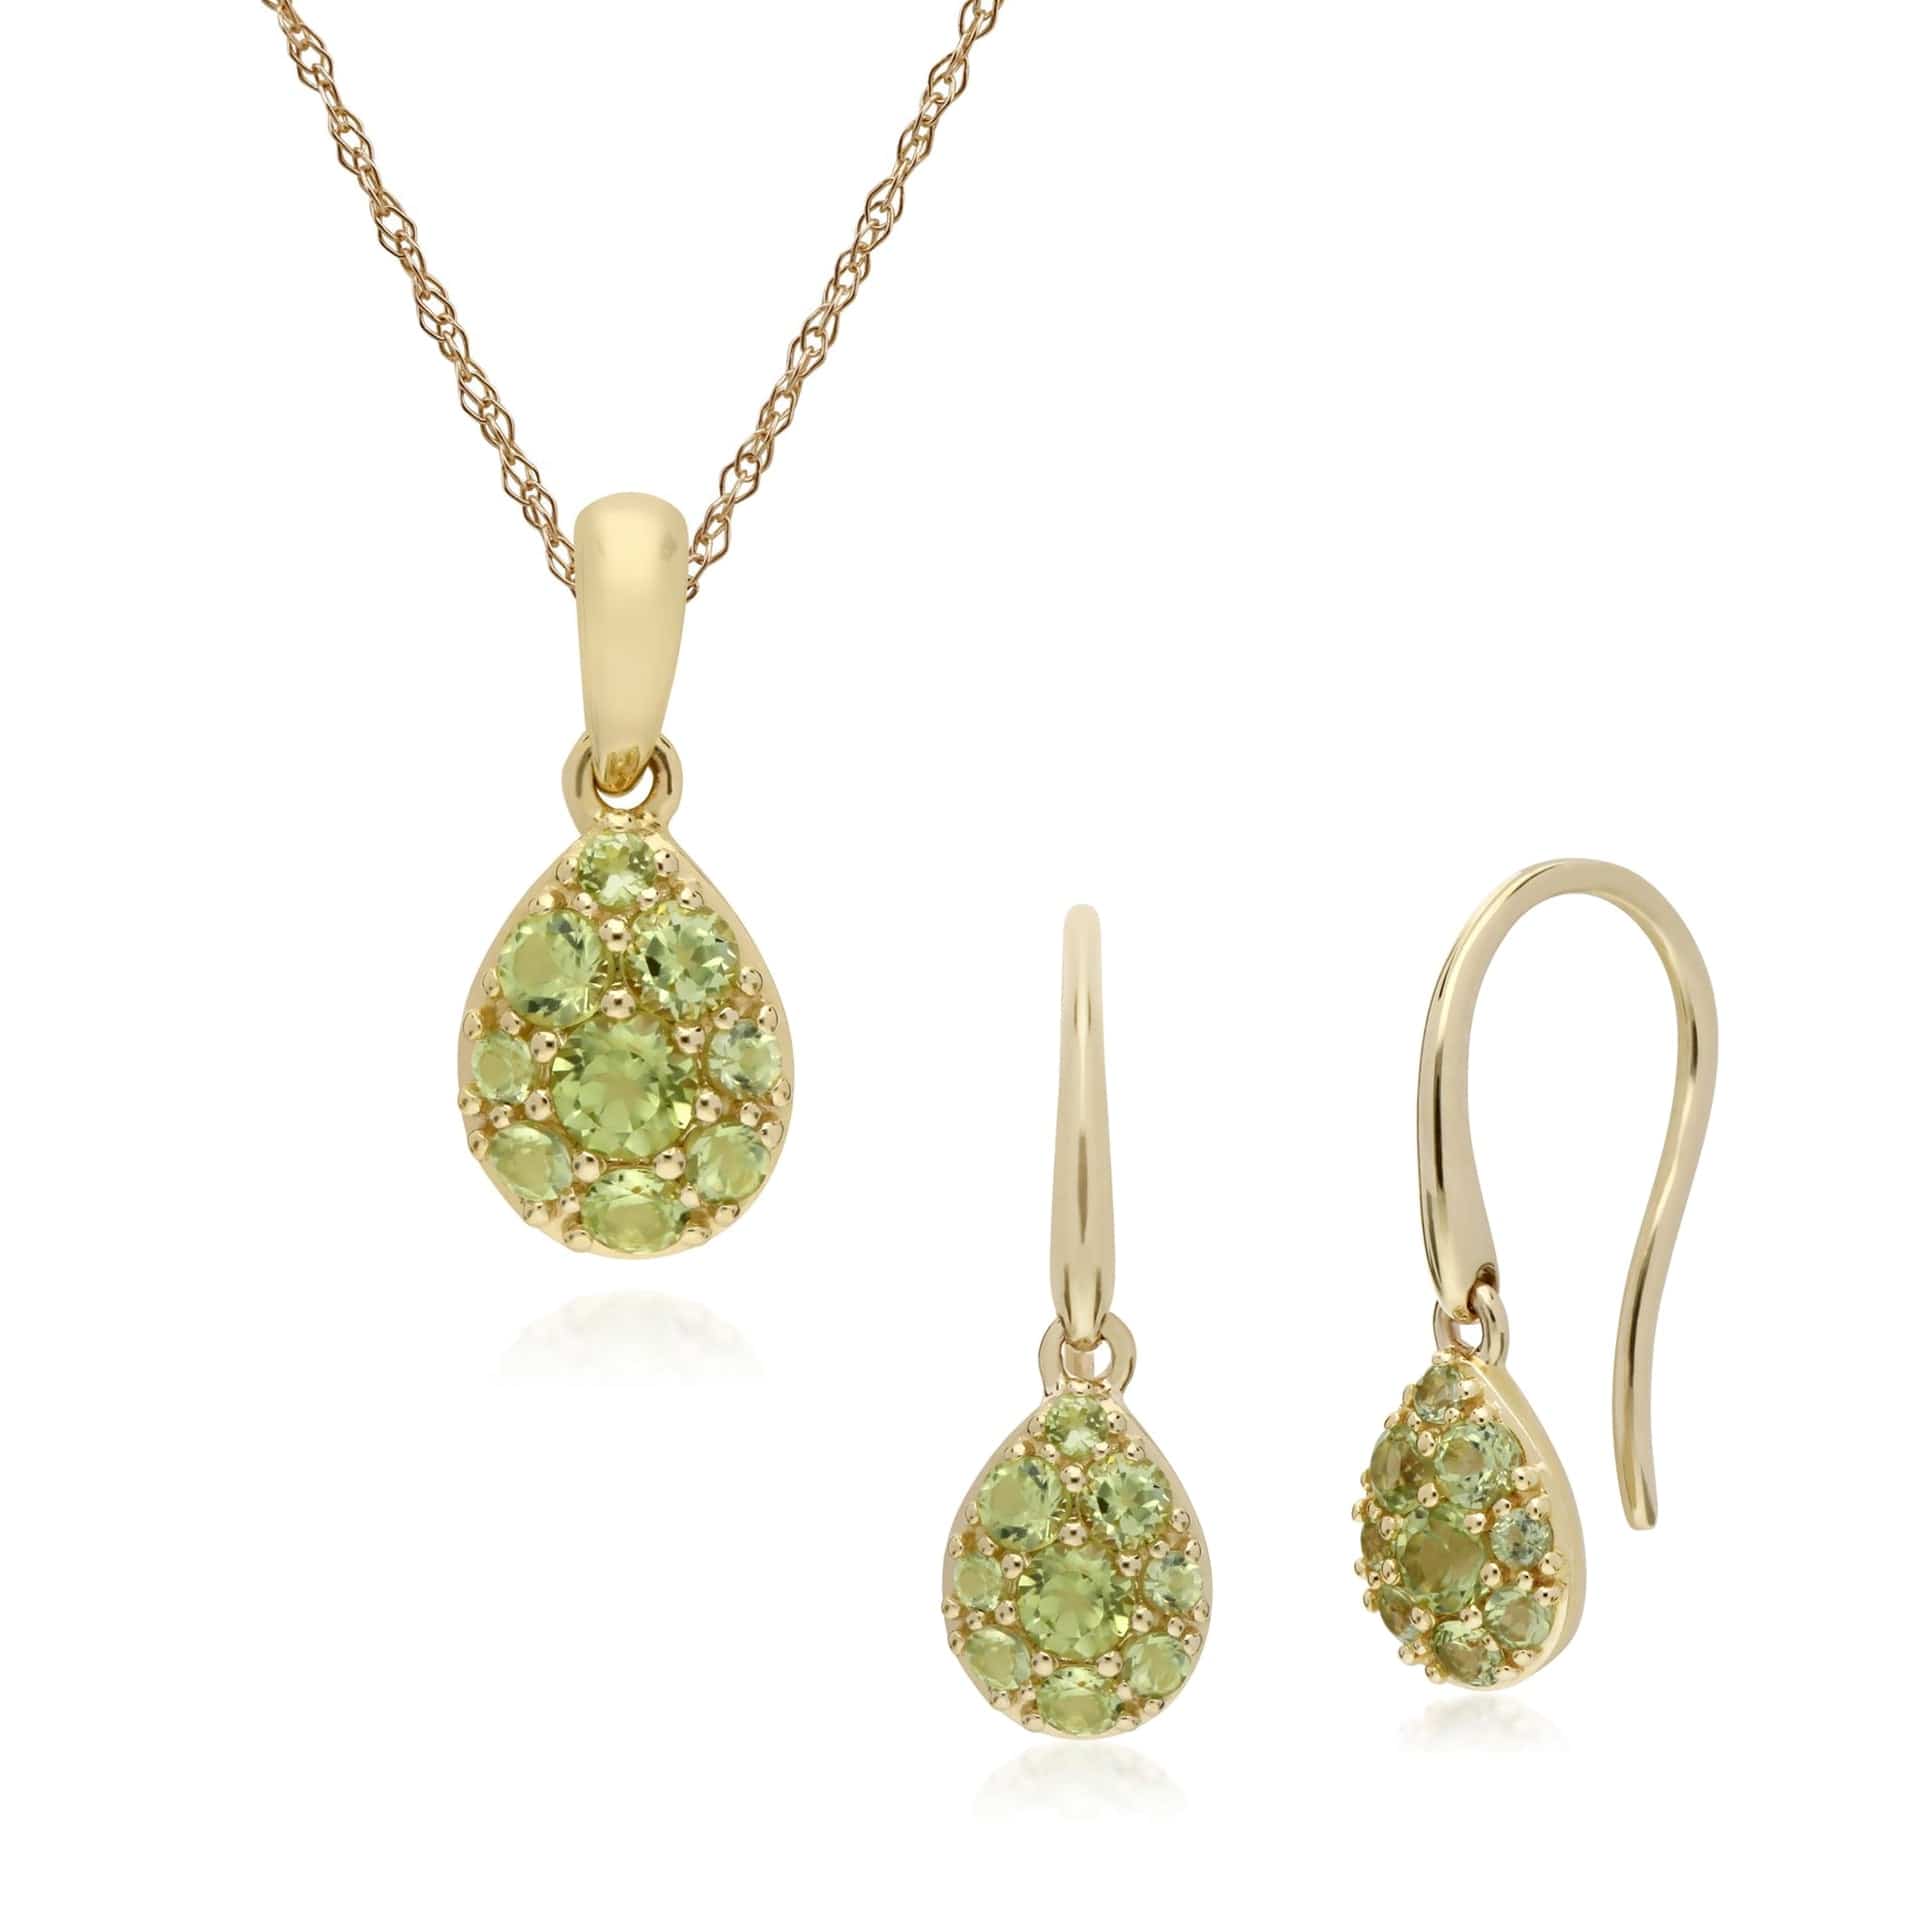 135E1574049-135P1909049 Classic Round Peridot Pear Cluster Drop Earrings & Pendant Set in 9ct Yellow Gold 1